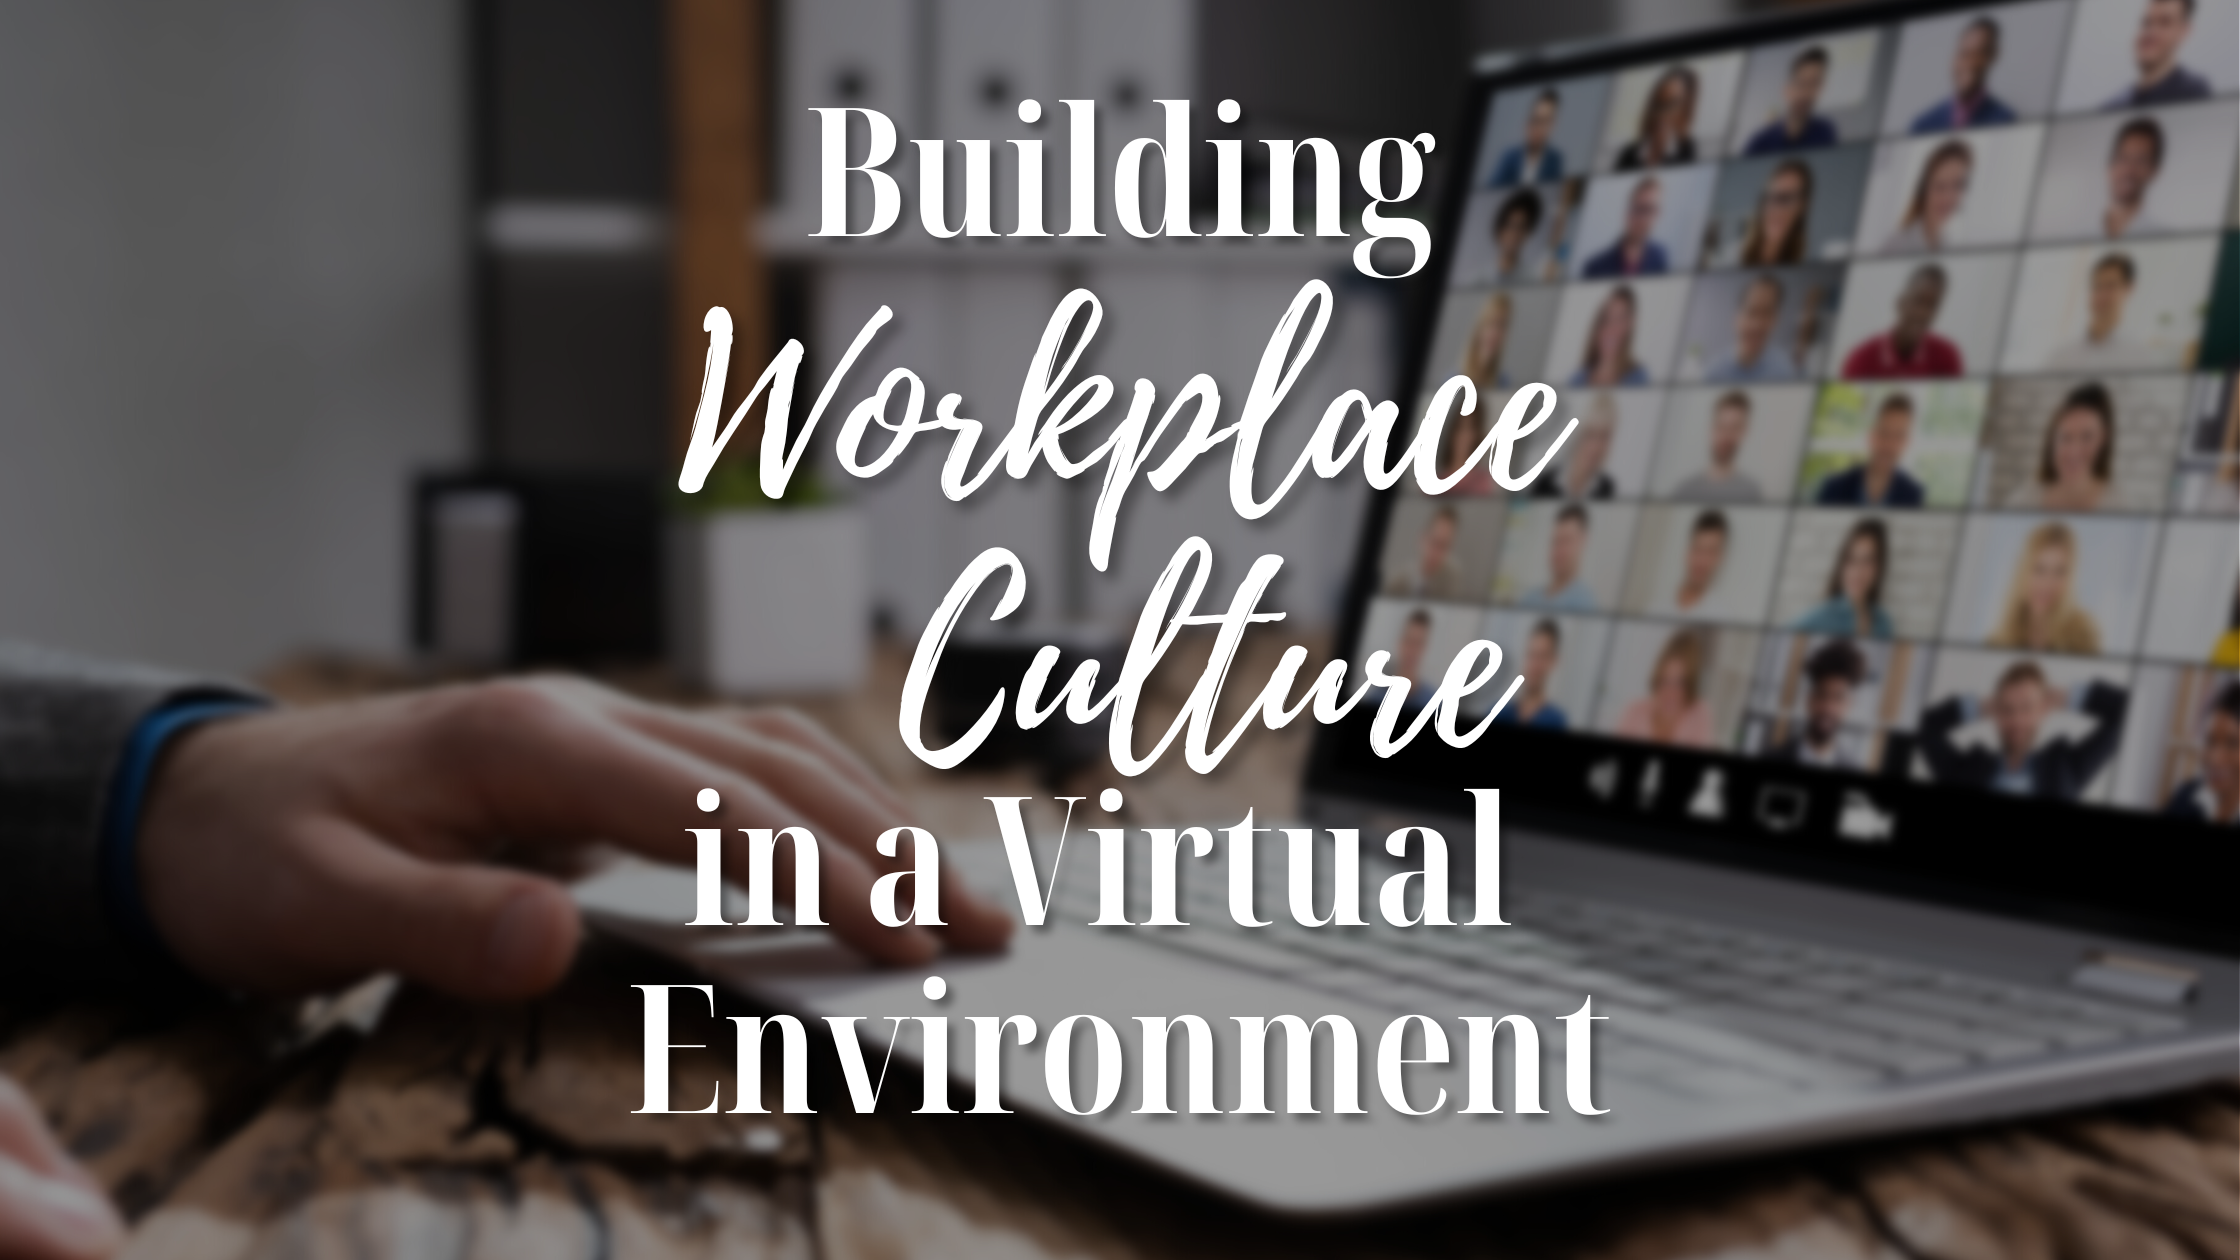 Building Workplace Culture in a Virtual Environment